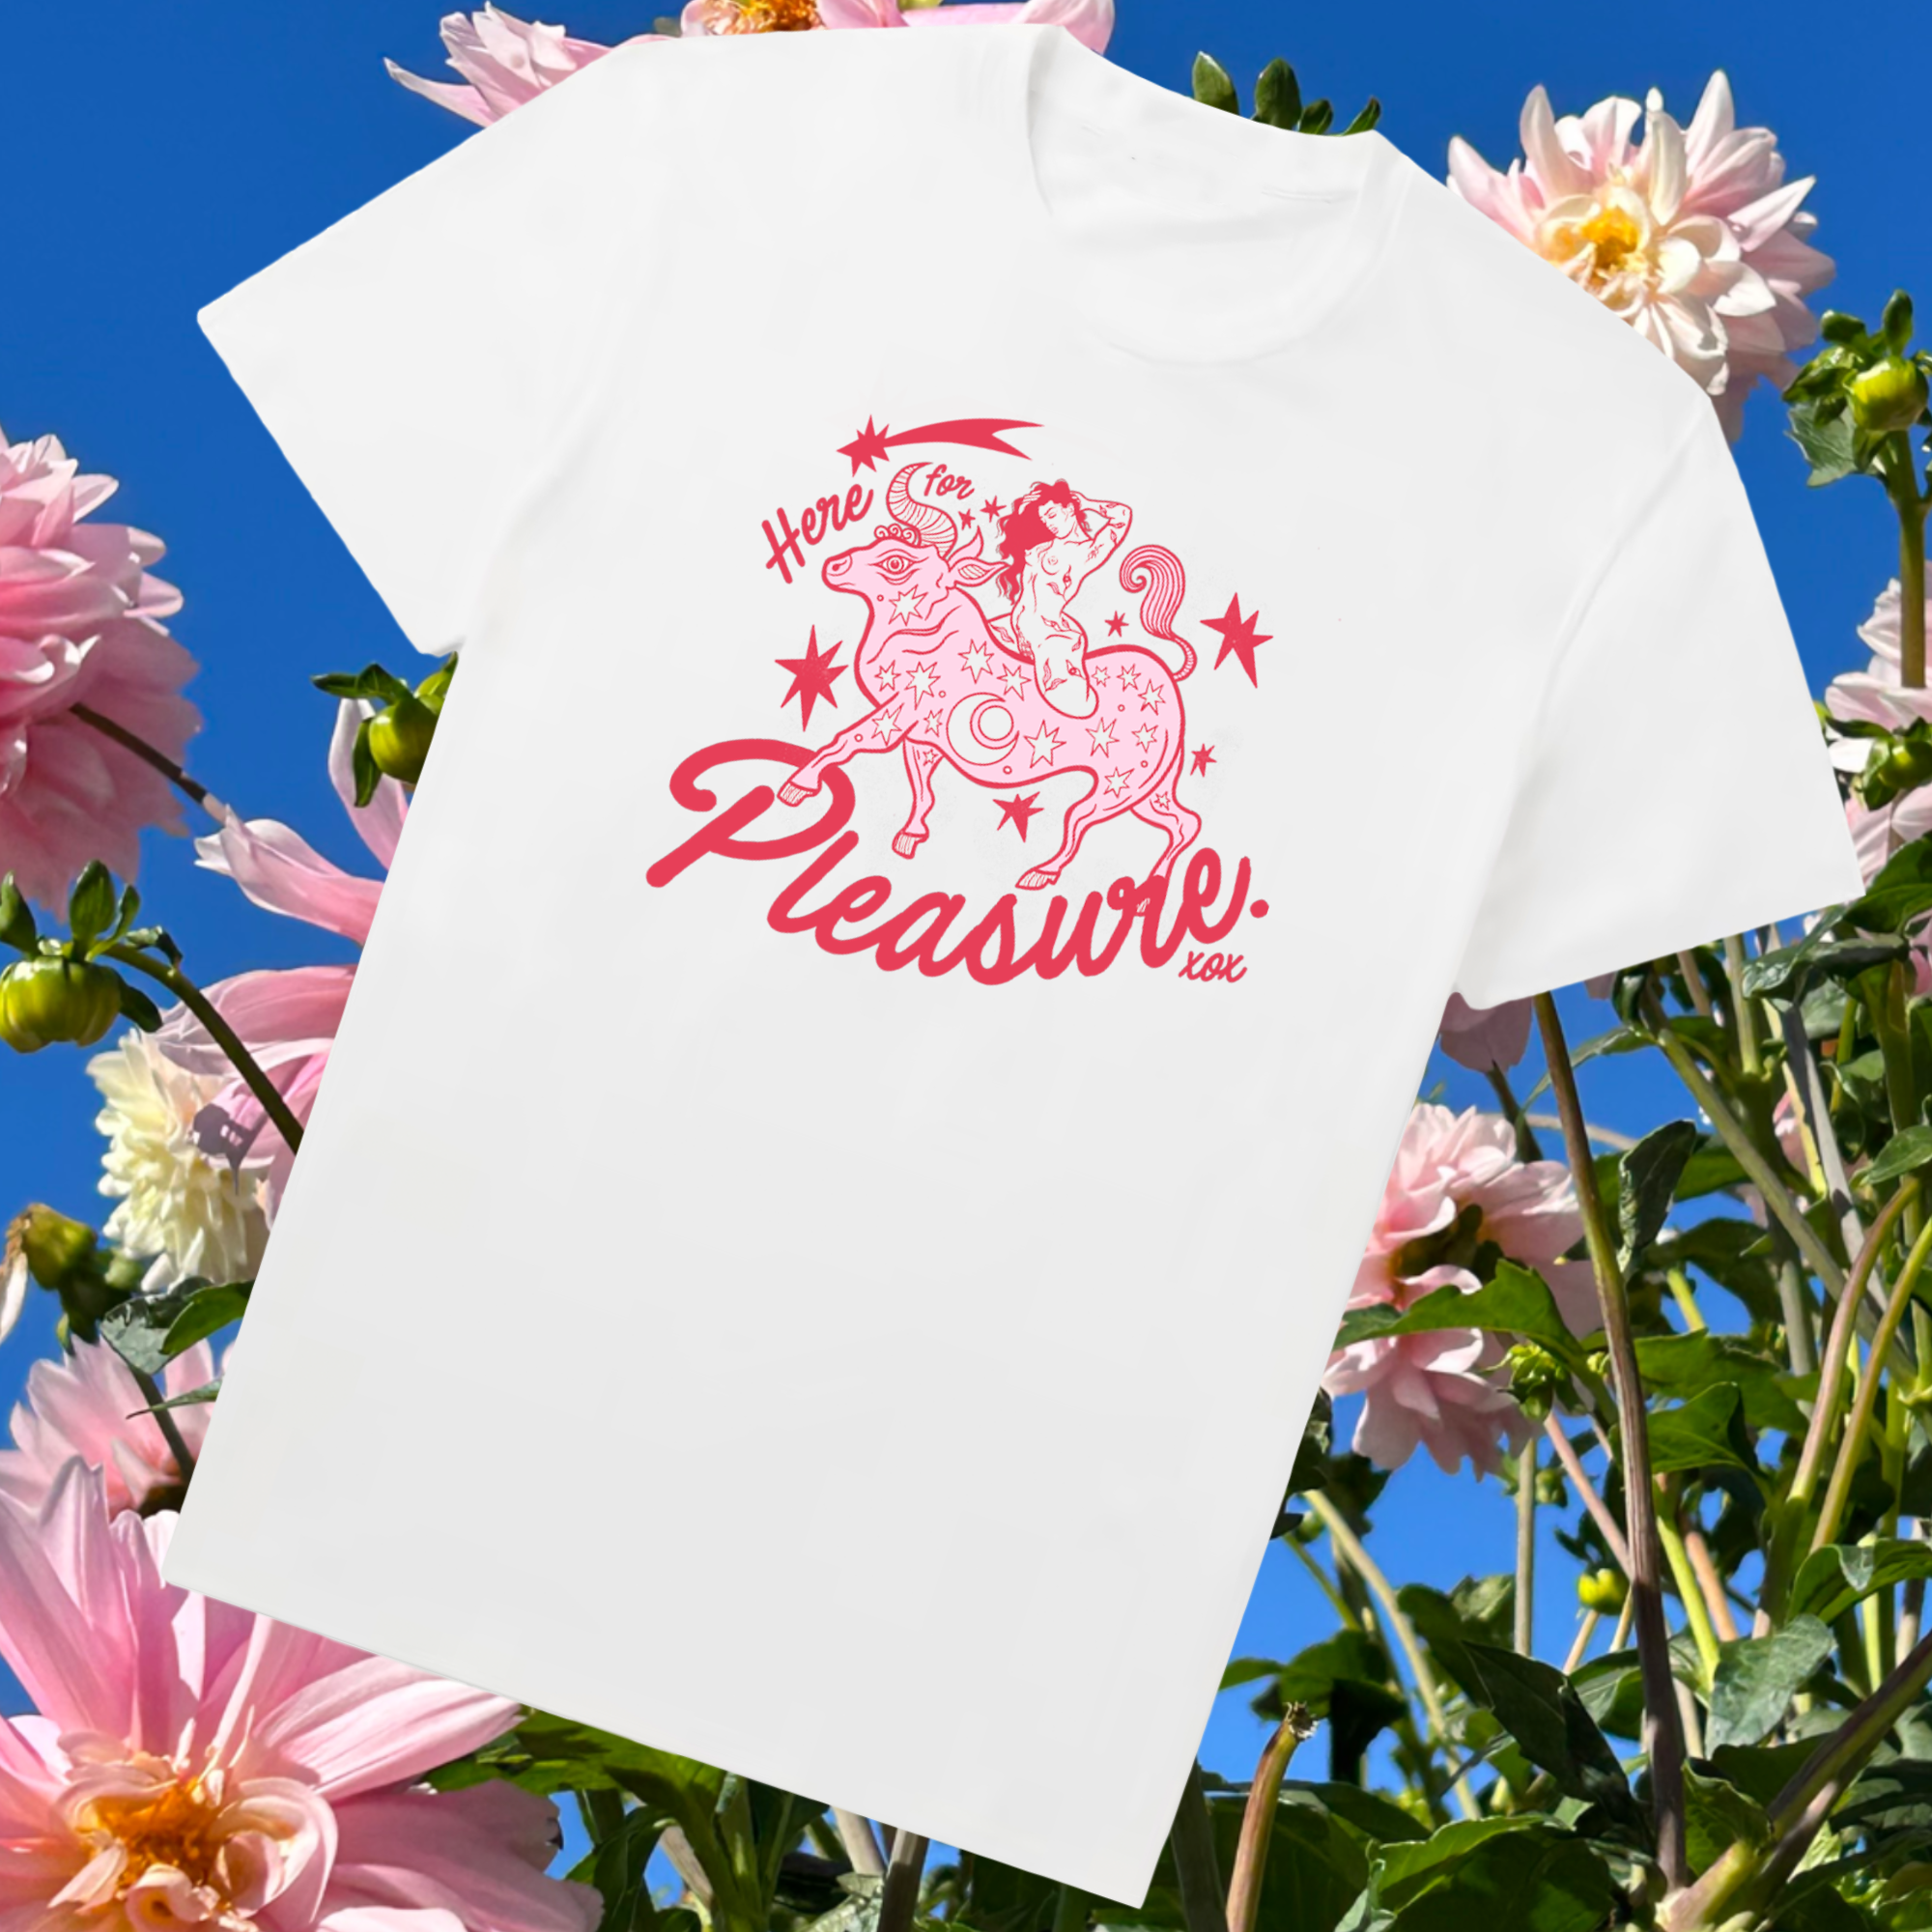 HERE FOR PLEASURE T-SHIRT